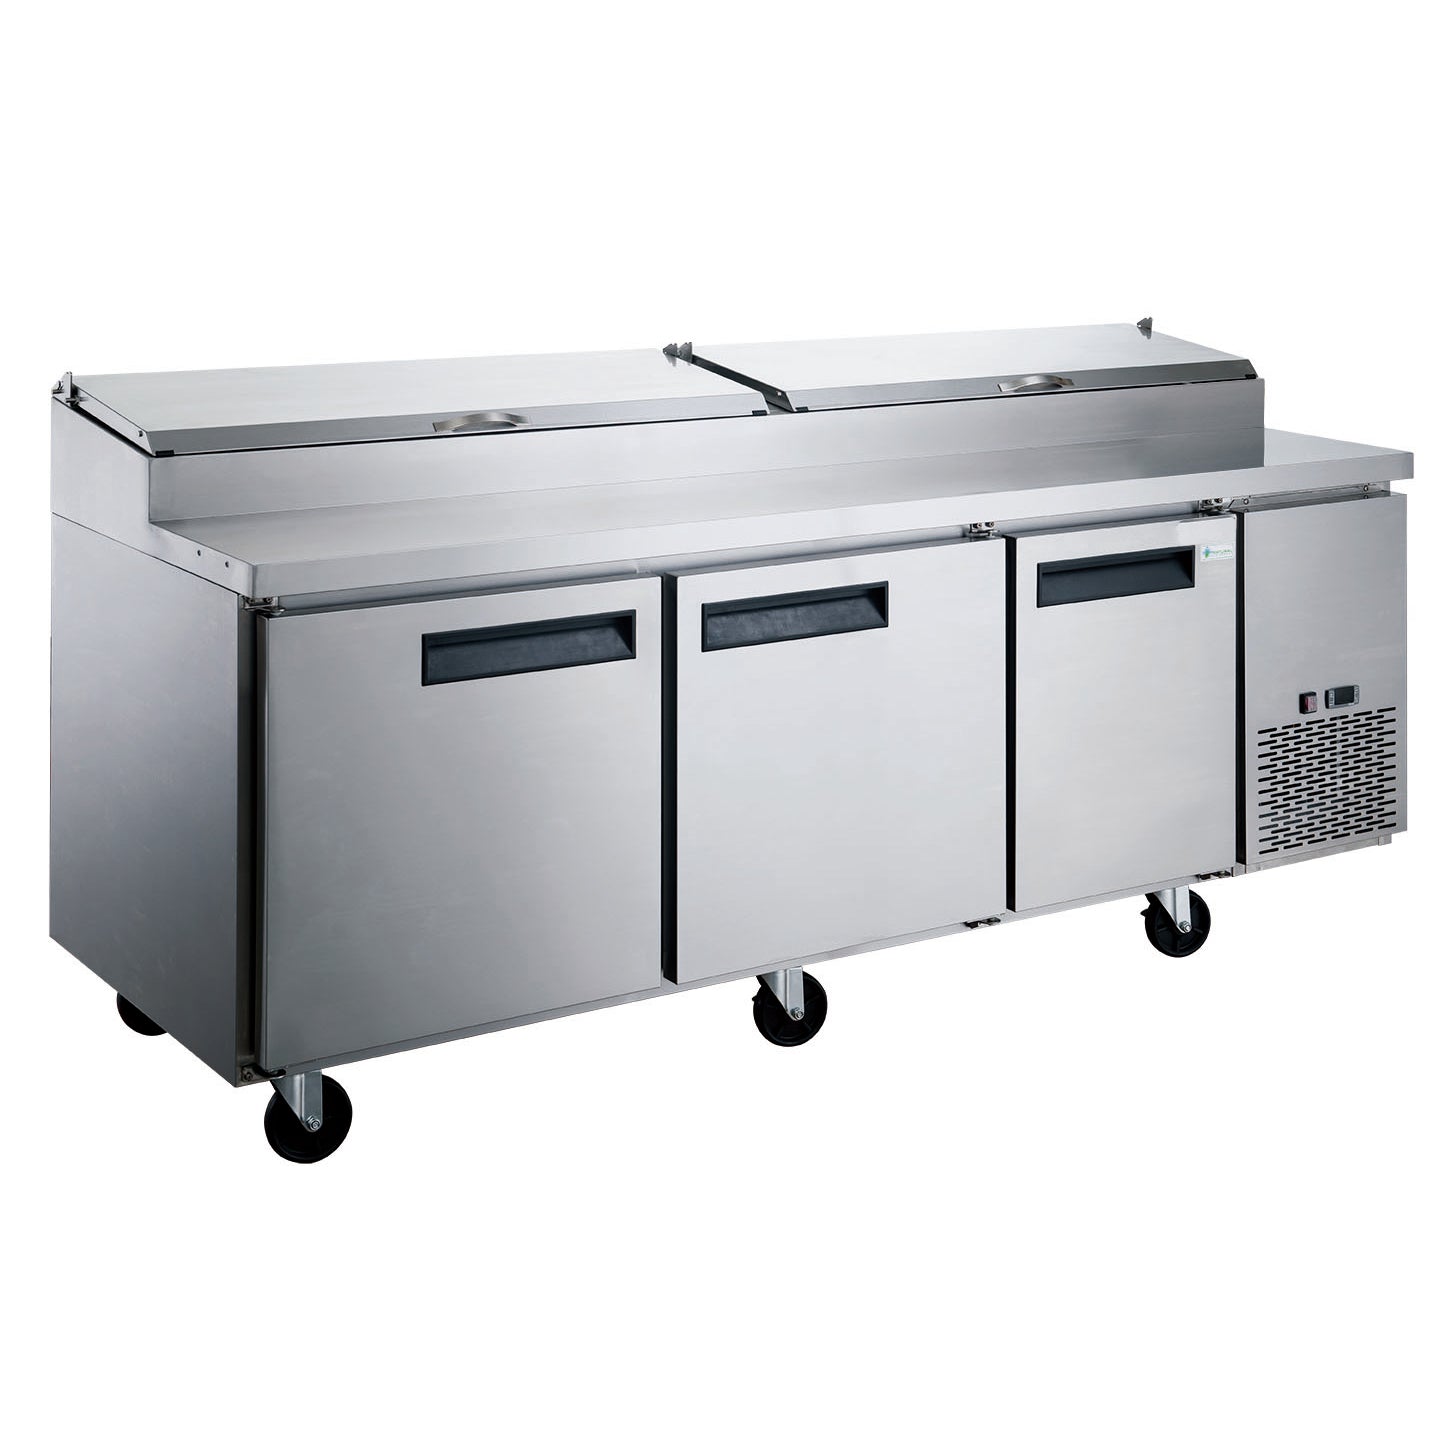 Chef AAA -  TICL3-HC, Commercial 90" Pizza Prep Table Refrigerator 12 Pans 3 Door Stainless Steel 24.8 cu.ft.